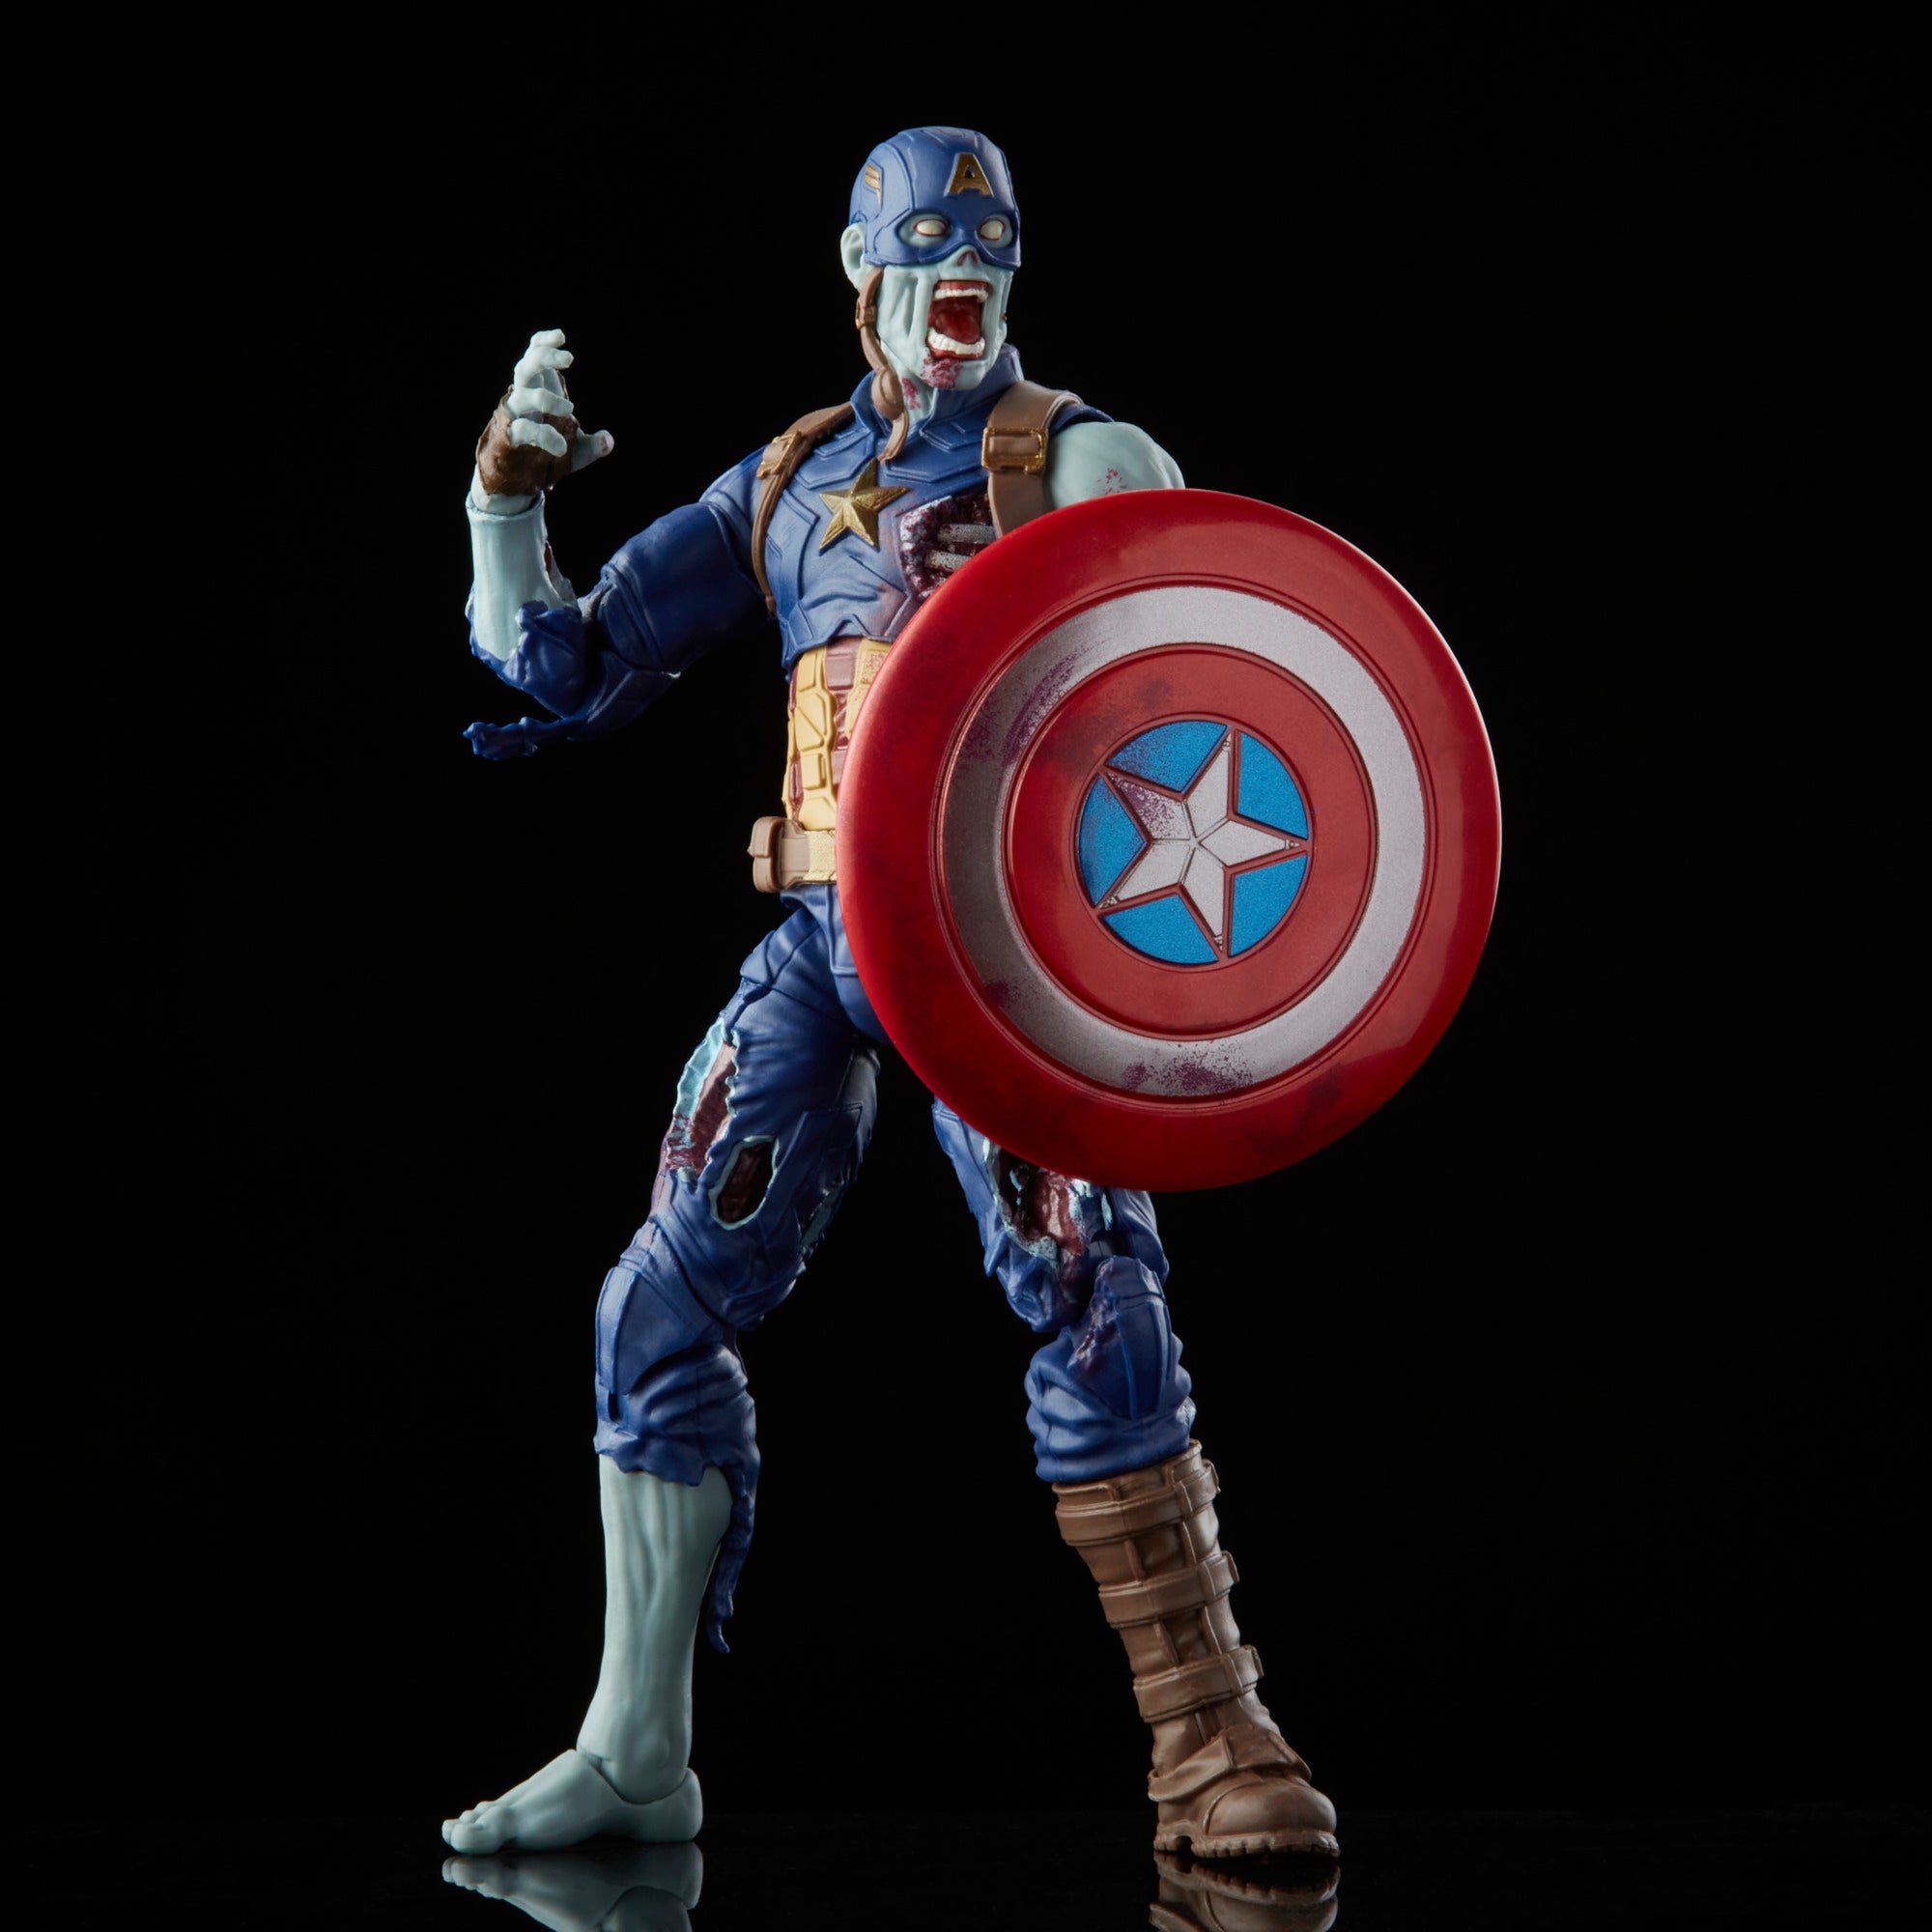 Marvel Avengers Mini Avengers - Mini Avengers . Buy Avengers toys in India.  shop for Marvel Avengers products in India.